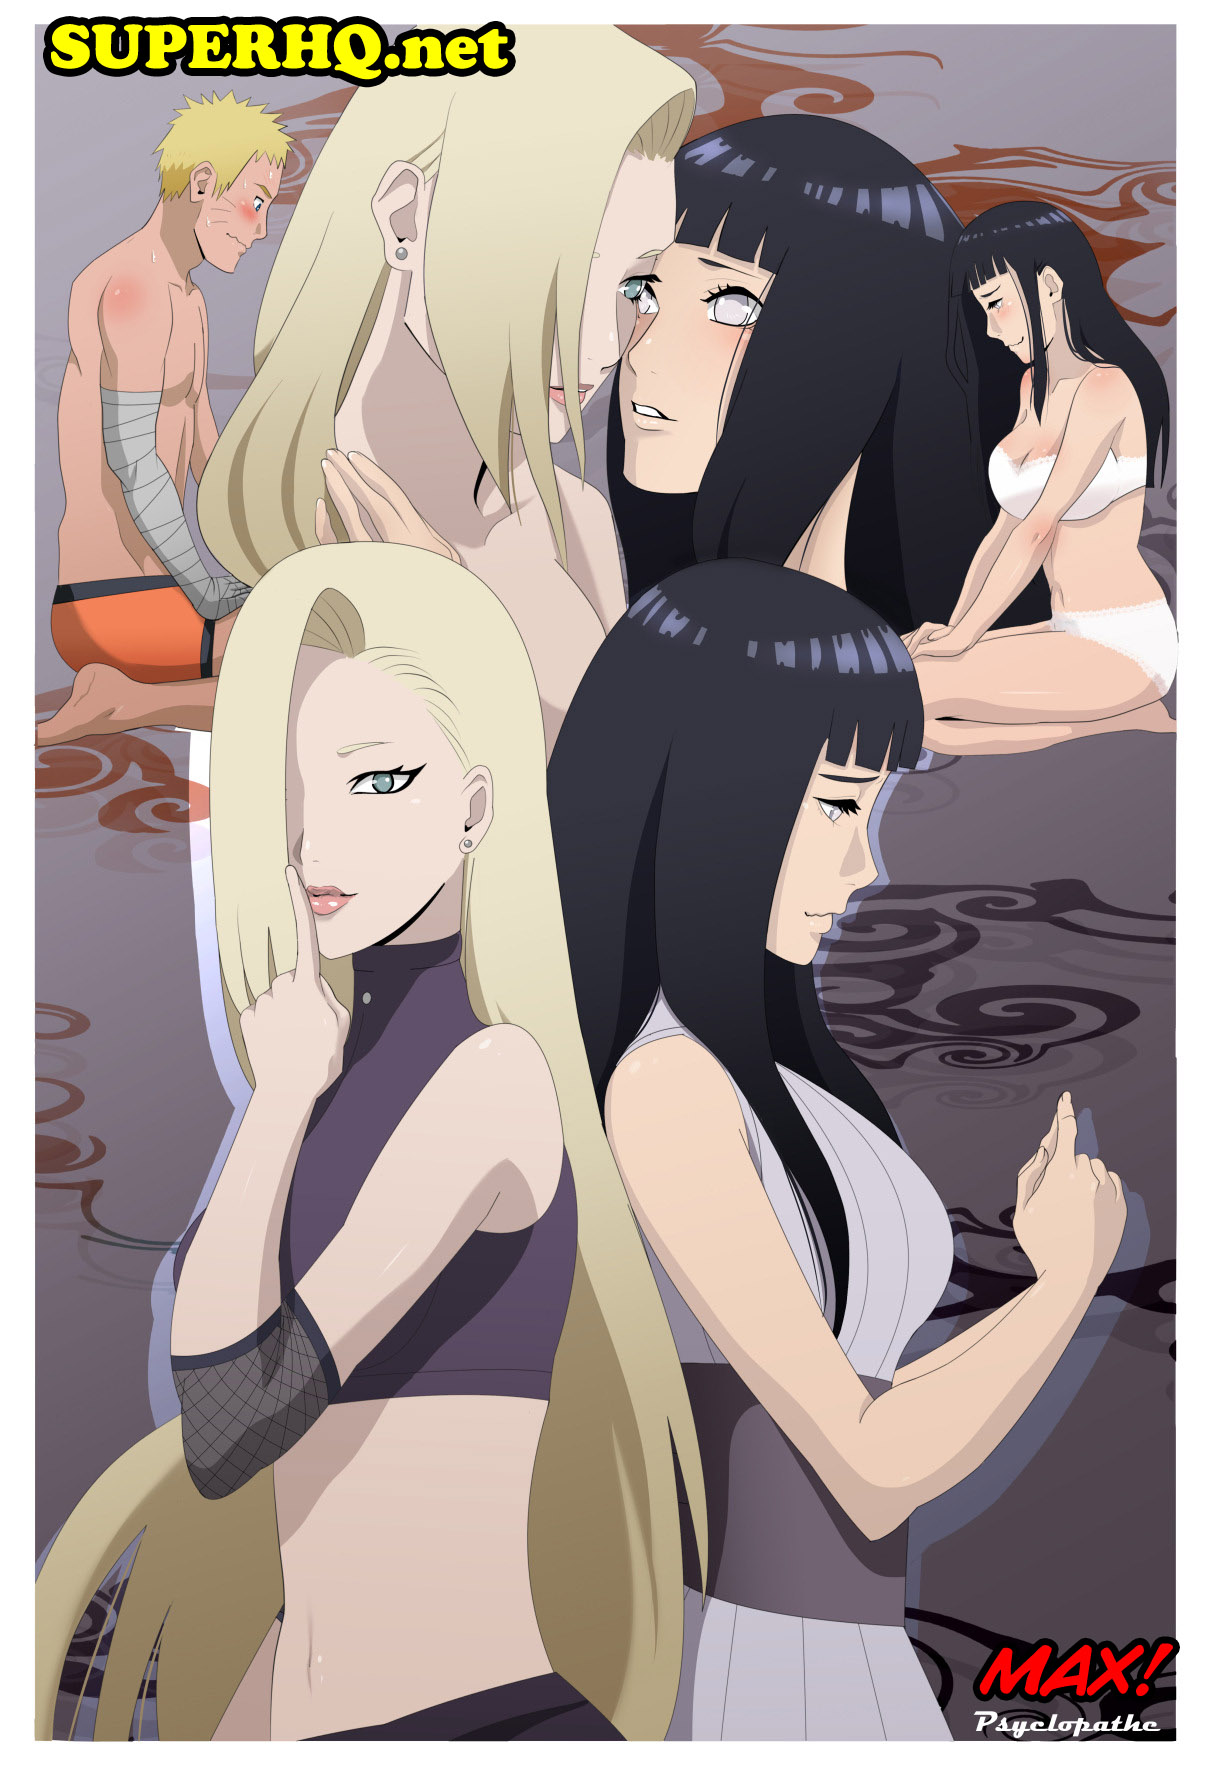 Naruto The Last – Bring Down the Shyness - 2